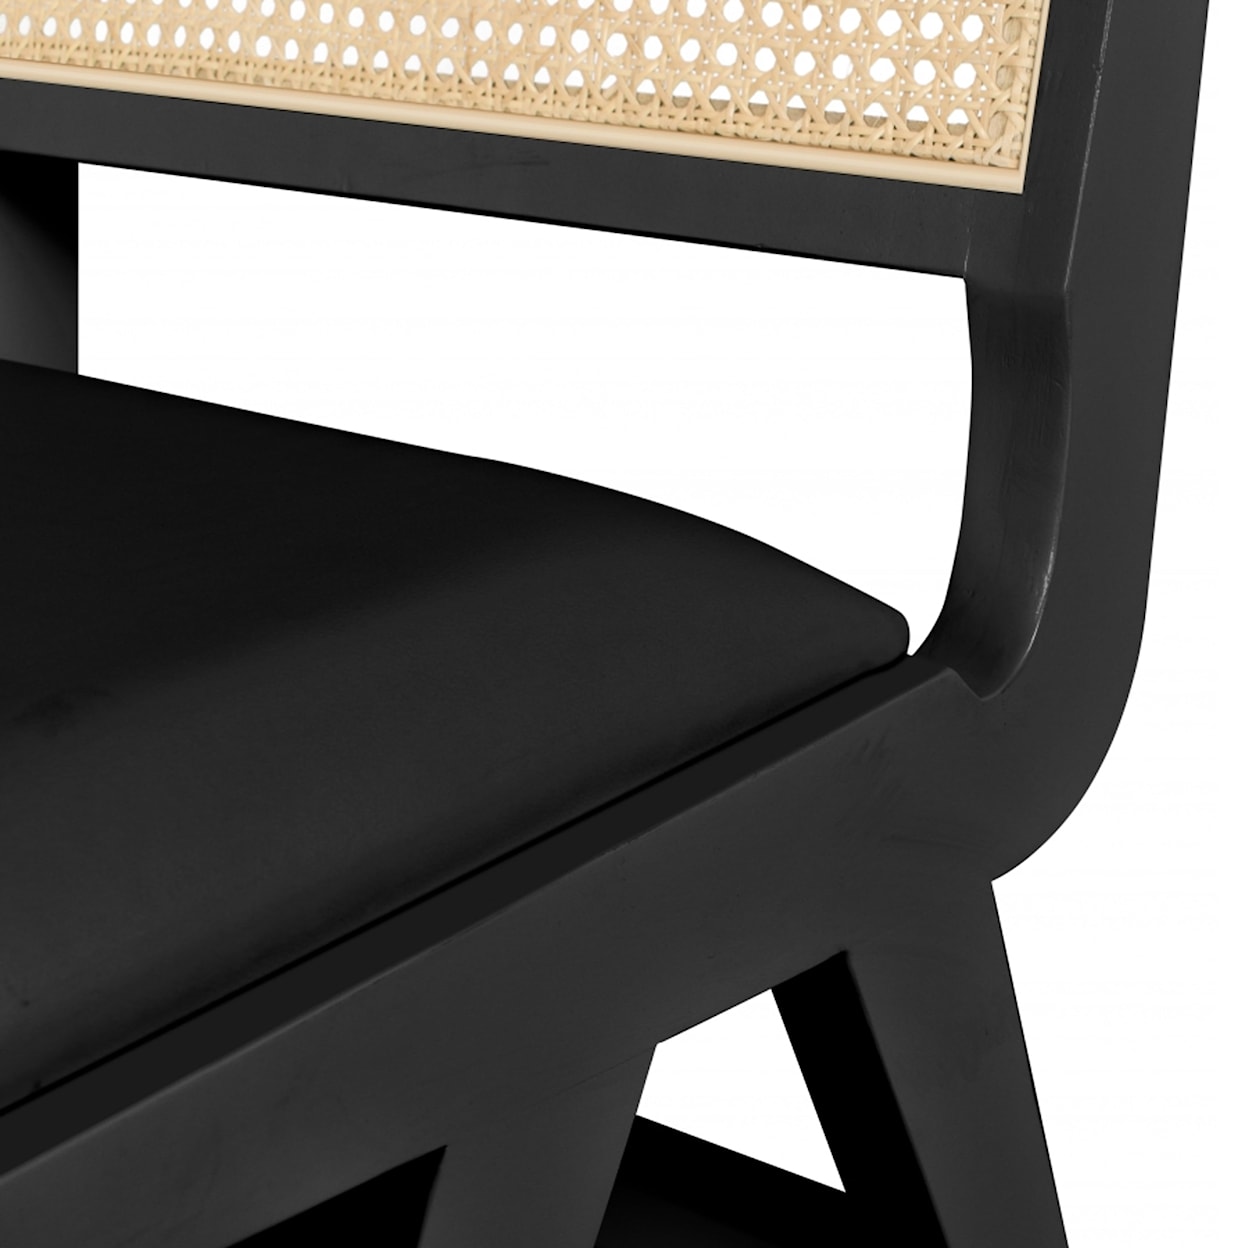 Meridian Furniture Abby Dining Side Chair